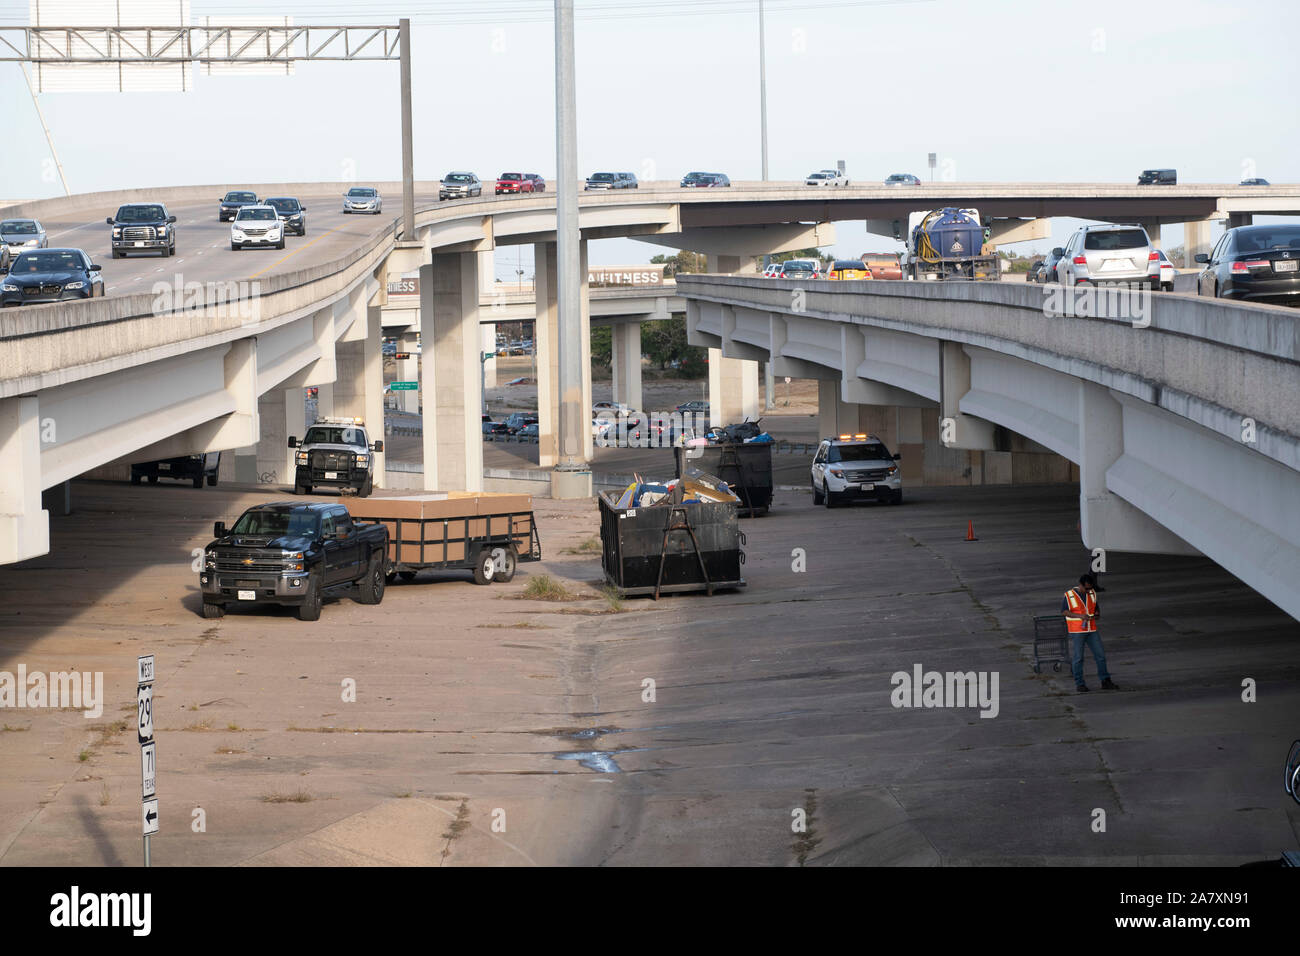 Workers from the Texas Highway Department finish cleaning up a homeless encampment on public right-of-way under a highway overpass in Austin as ordered by Texas Gov. Greg Abbott. Stock Photo